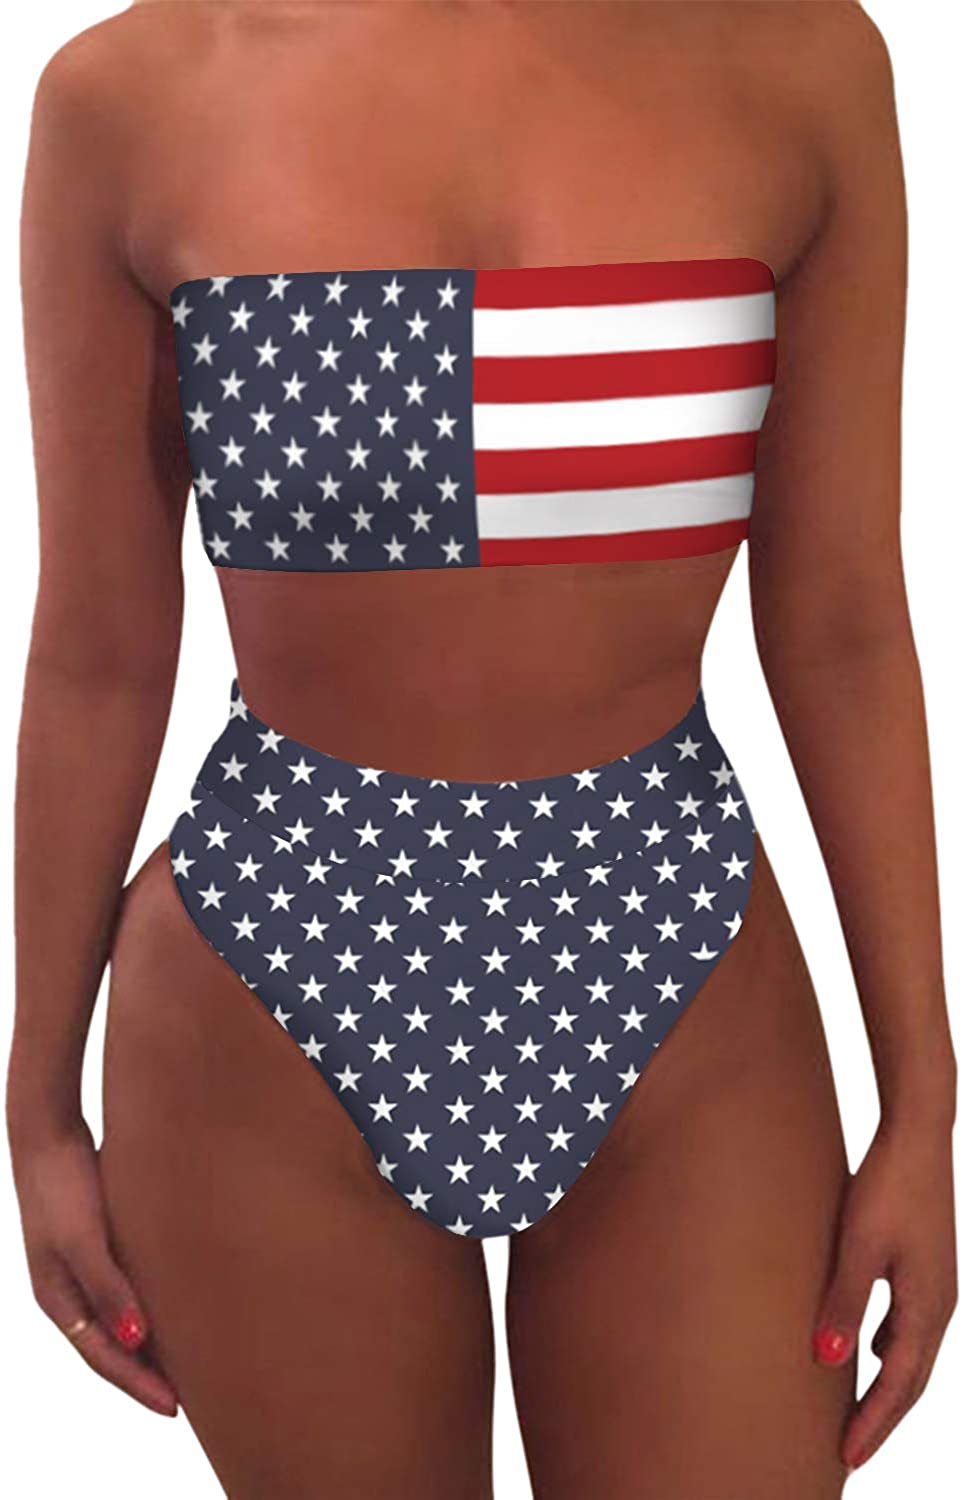 Cheeky High Waist American Flag Two Piece Bathing Suit